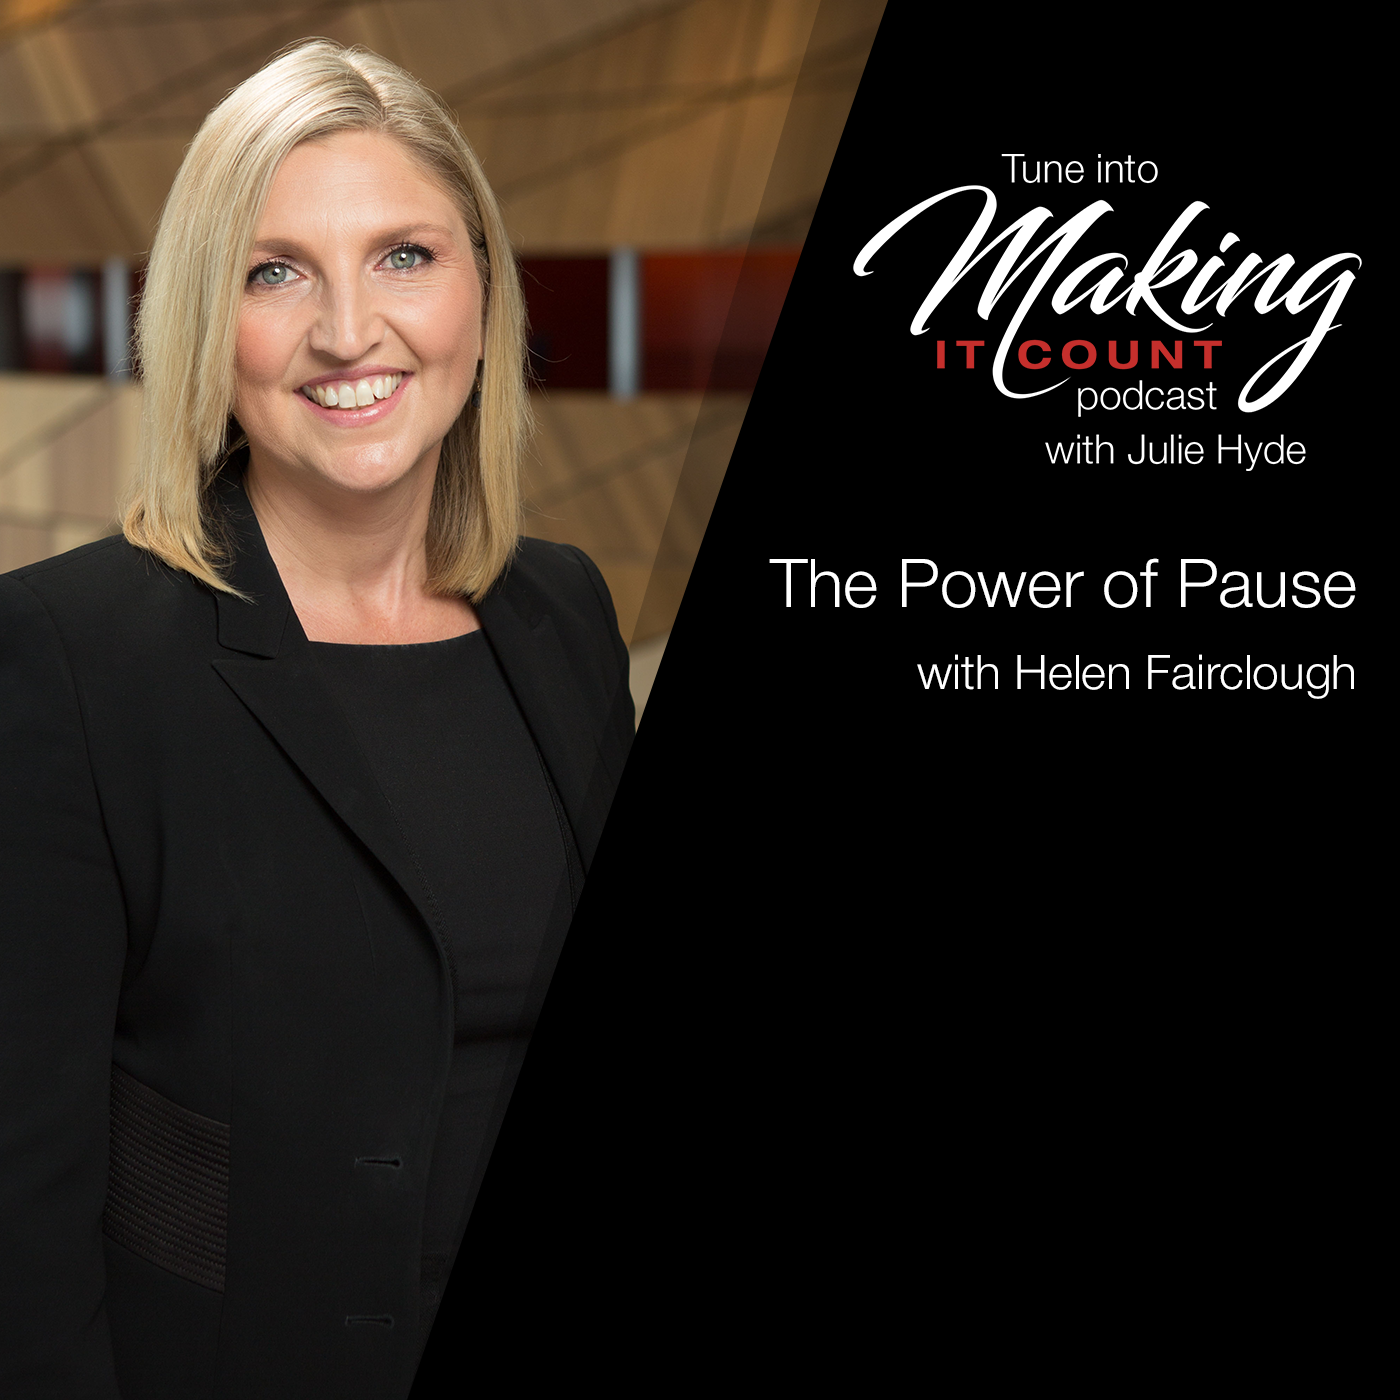 power-of-pause-stop-helen-fairclough-julie-hyde-making-it-count-busy-leadership-leader-leaders-keynote-mindset-speaker-mentor-business-empower-lead-empowering-podcast-great-intentional-authentic-mentor-coach-role-model-top-best-inspire-engage-practical-insightful-boost-performance-tips-how-to-strategy-powerful-change-mindset-thrive-results-corporate-future-smart-program-mentorship-career-next-level-step-reconnect-control-proactive-agile-adaptable-one-on-one-woman-lady-boss-female-sydney-australia-speaker-host-guide-guidance-business-ceo-management